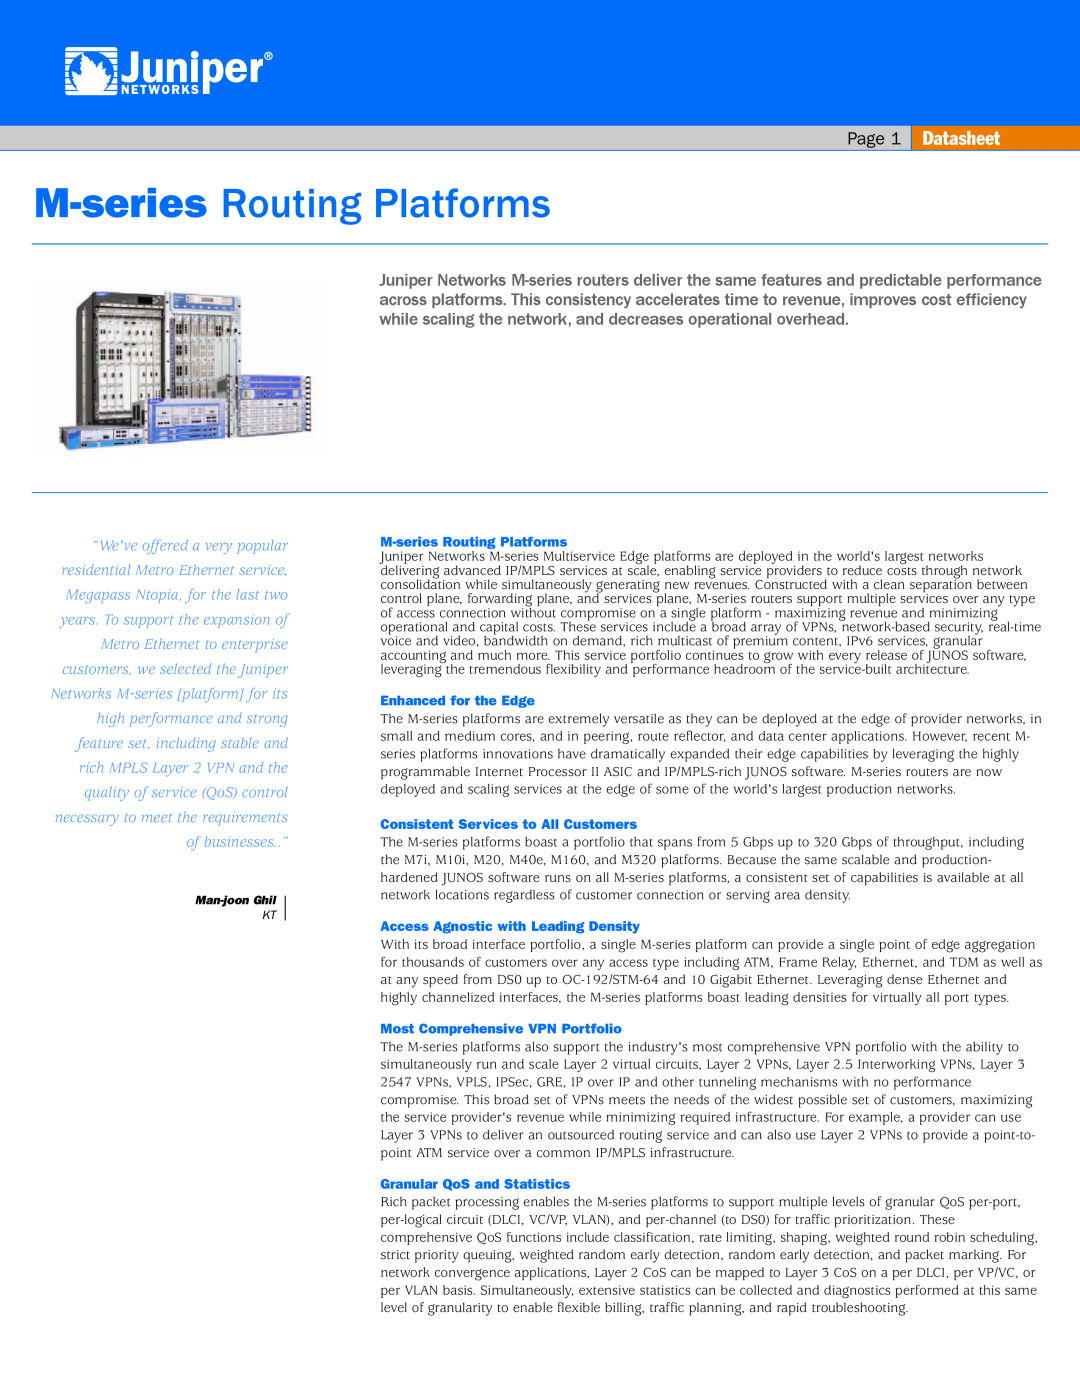 Juniper Networks M-Series manual Datasheet, Page, M-series Routing Platforms, Enhanced for the Edge 